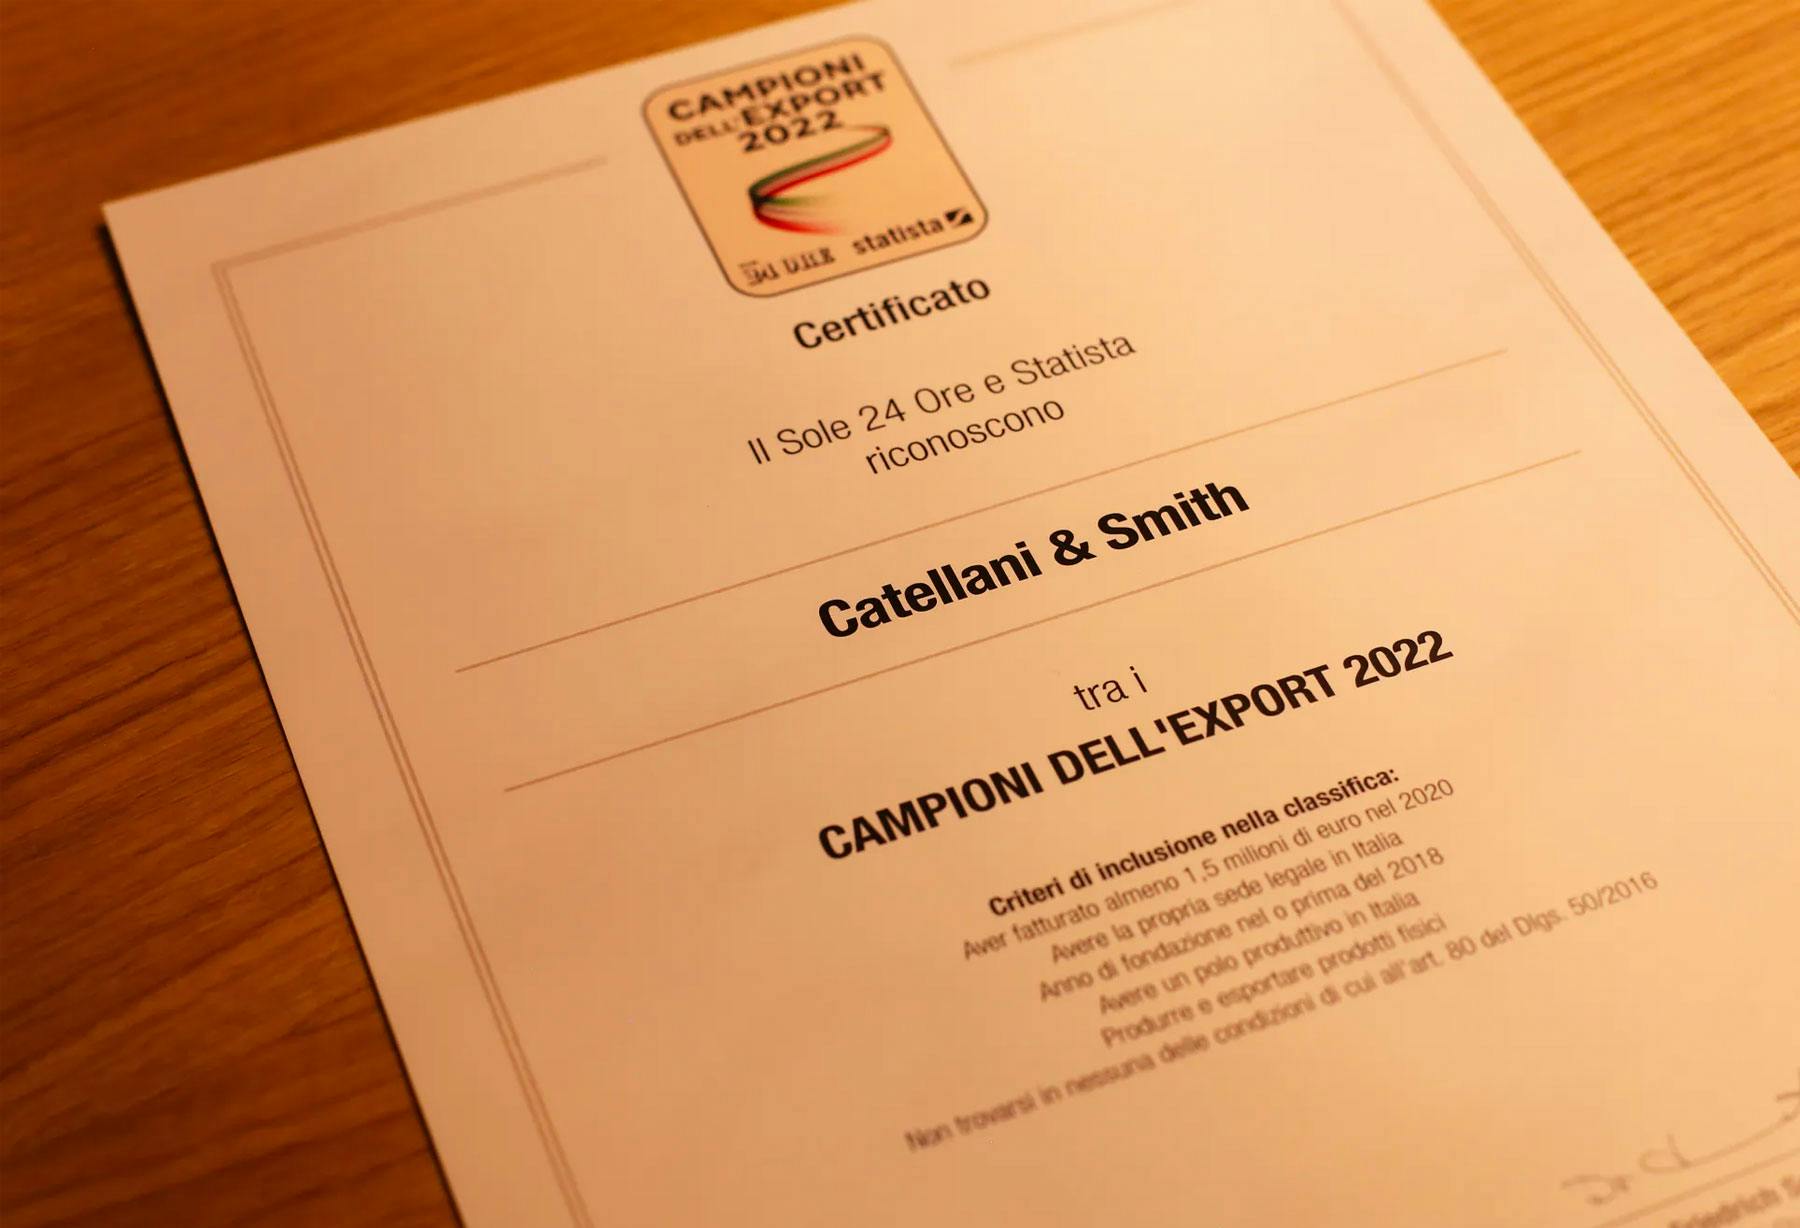 <p>Il Sole 24 Ore newspaper, in collaboration with the well-known independent German research institute, selects Catellani &amp; Smith as one of the 200 Italian firms that obtained outstanding export results in 2020.</p>
